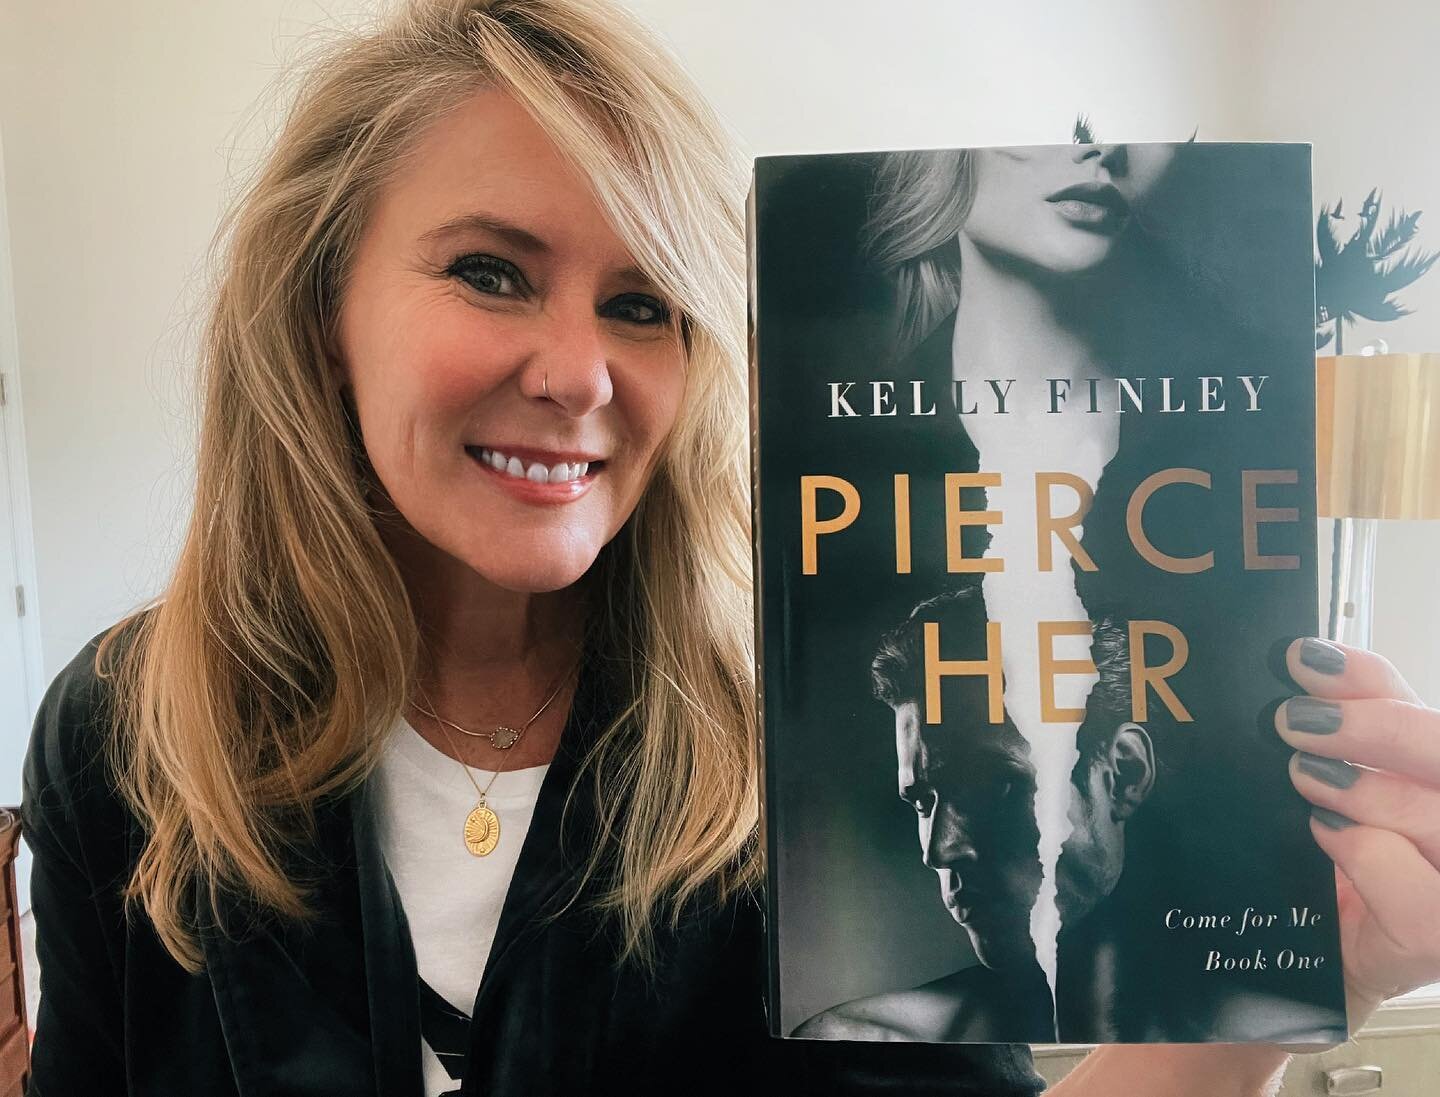 Hello, hot book. Are y&rsquo;all ready for a bada** heroine TOMORROW? One who takes on a sexy alpha? Come for her now and she will be in your hands. Head to my story or bio. 🔥❤️

#pierceher #comeforme #newrelease #romanticsuspense #heroine #celebrit